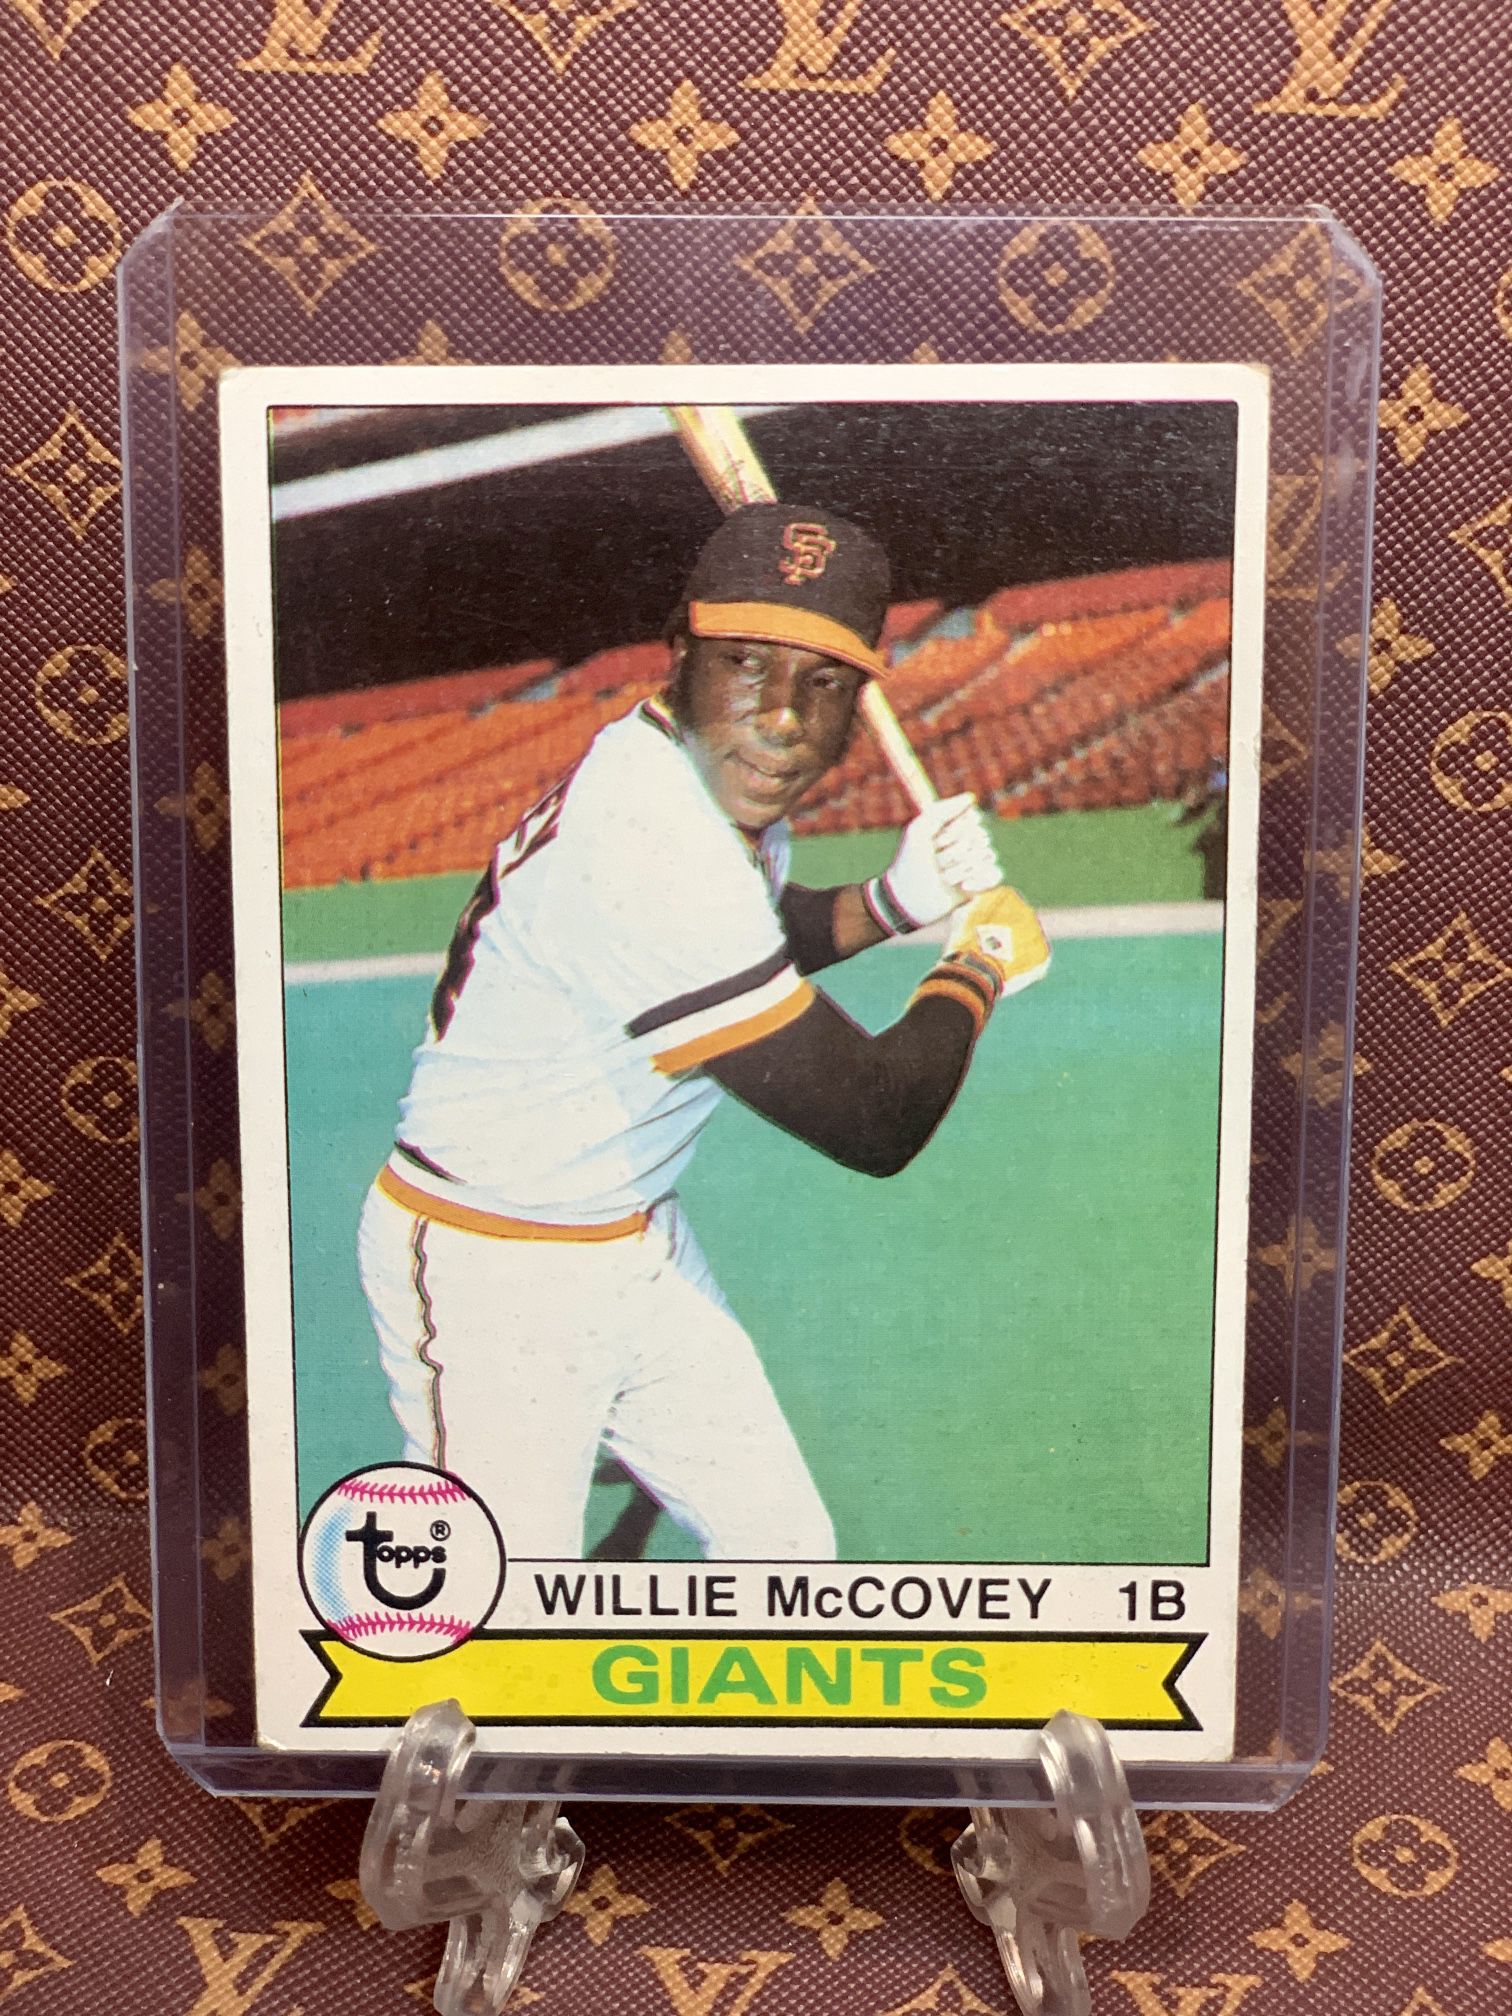 Vintage San Francisco Giants Hall Of Famer Willie McCovey Baseball Card for  Sale in Marina Del Rey, CA - OfferUp